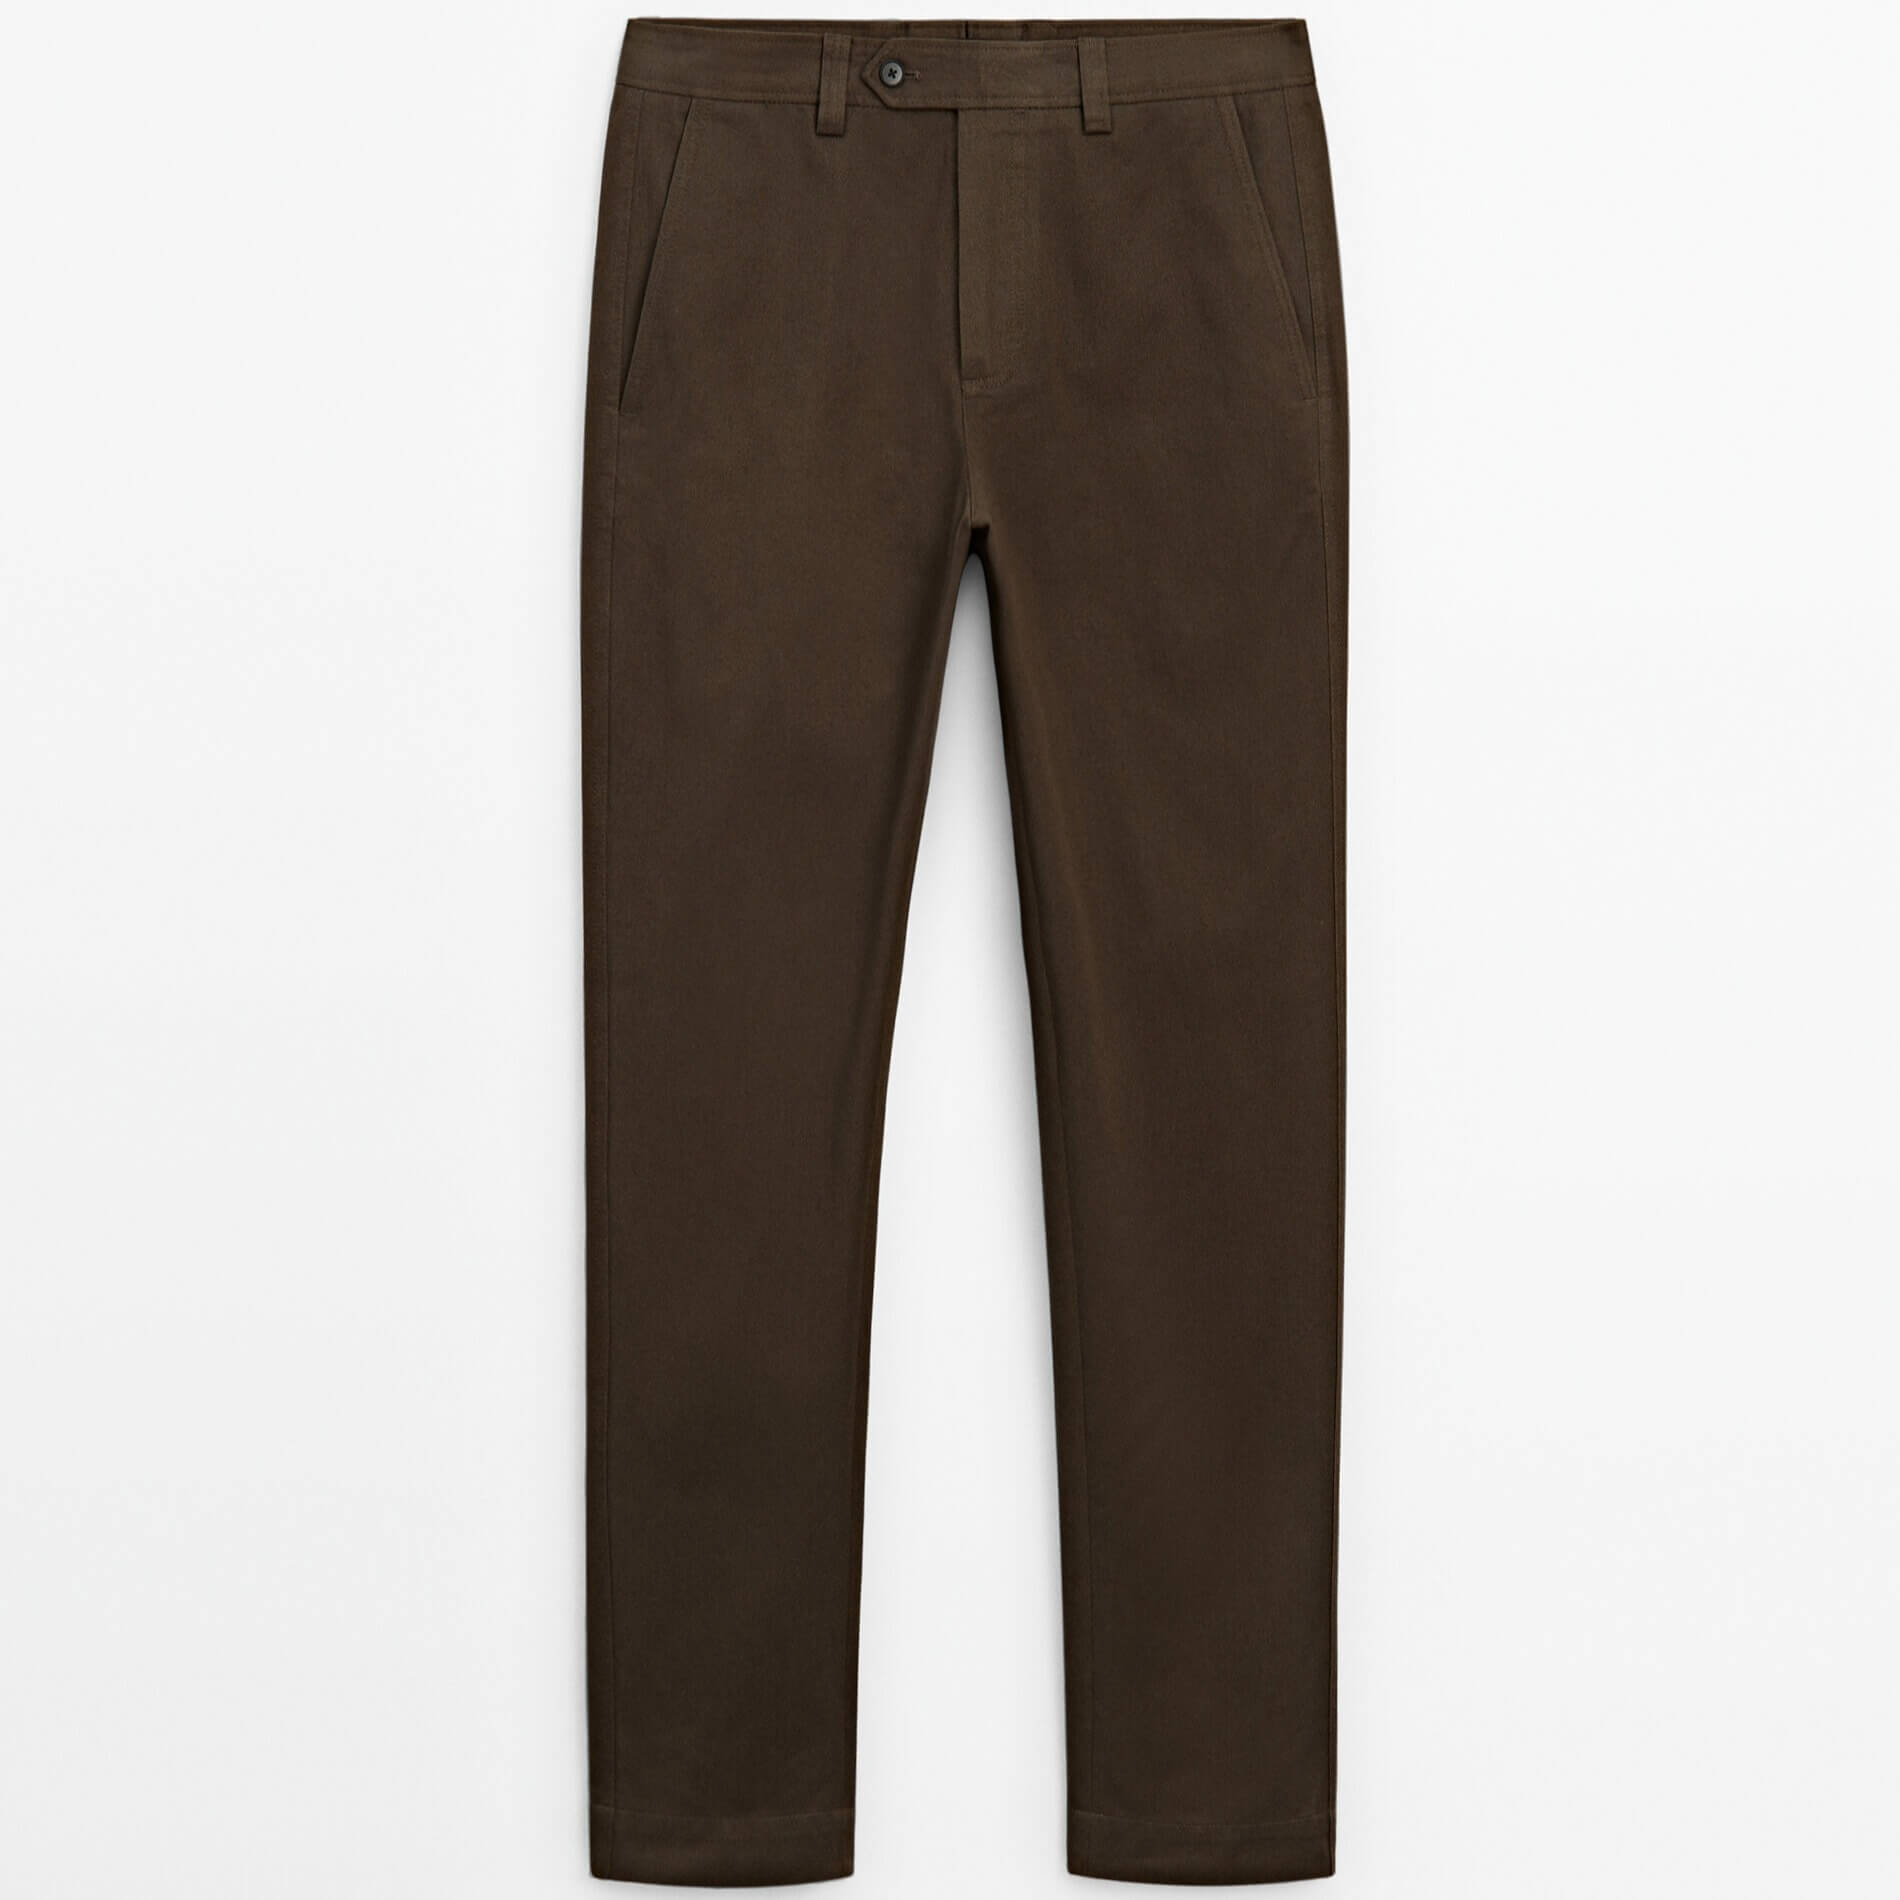 Брюки Massimo Dutti Relaxed Fit Belted Chino, коричневый брюки massimo dutti micro twill tapered fit chino светло коричневый